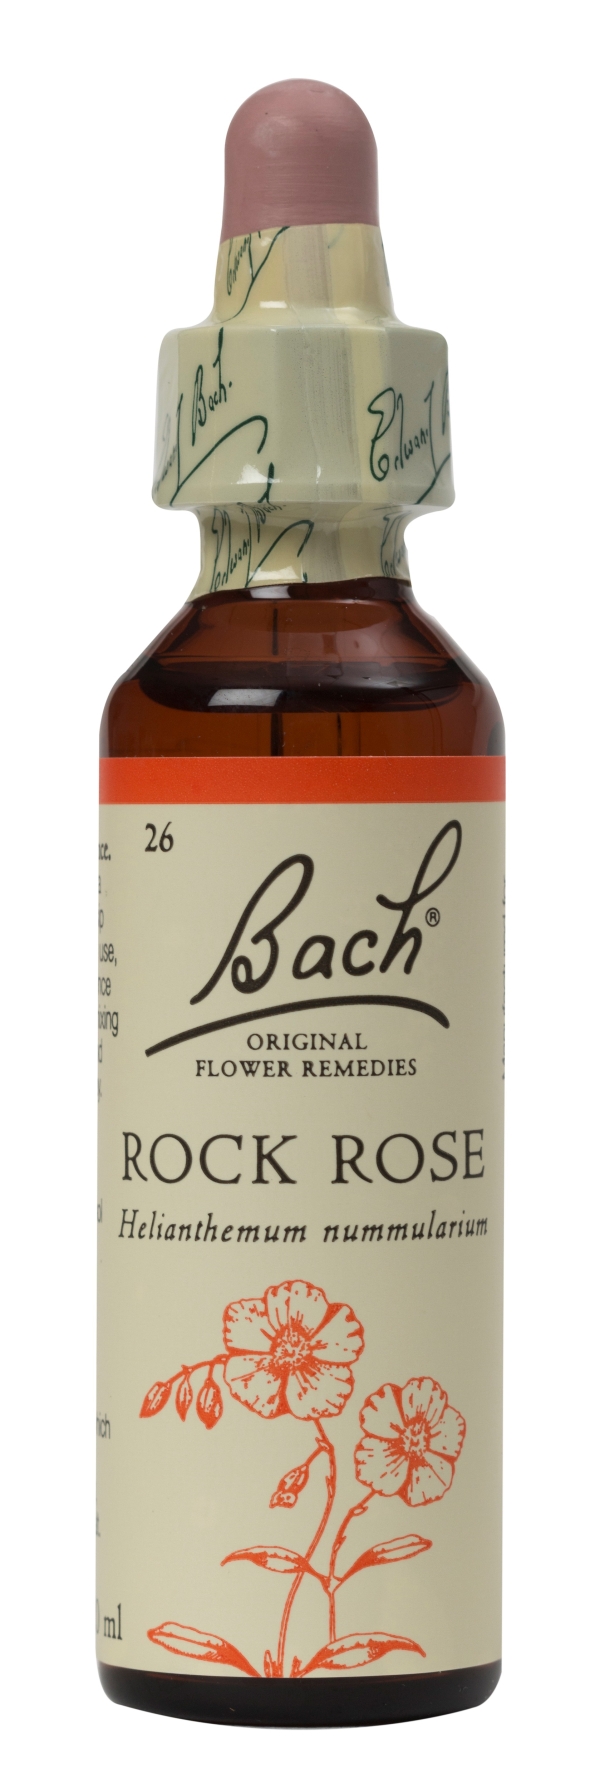 Nelson Bach Flower Remedies: Bach Rock Rose Flower Remedy (20ml) available online here